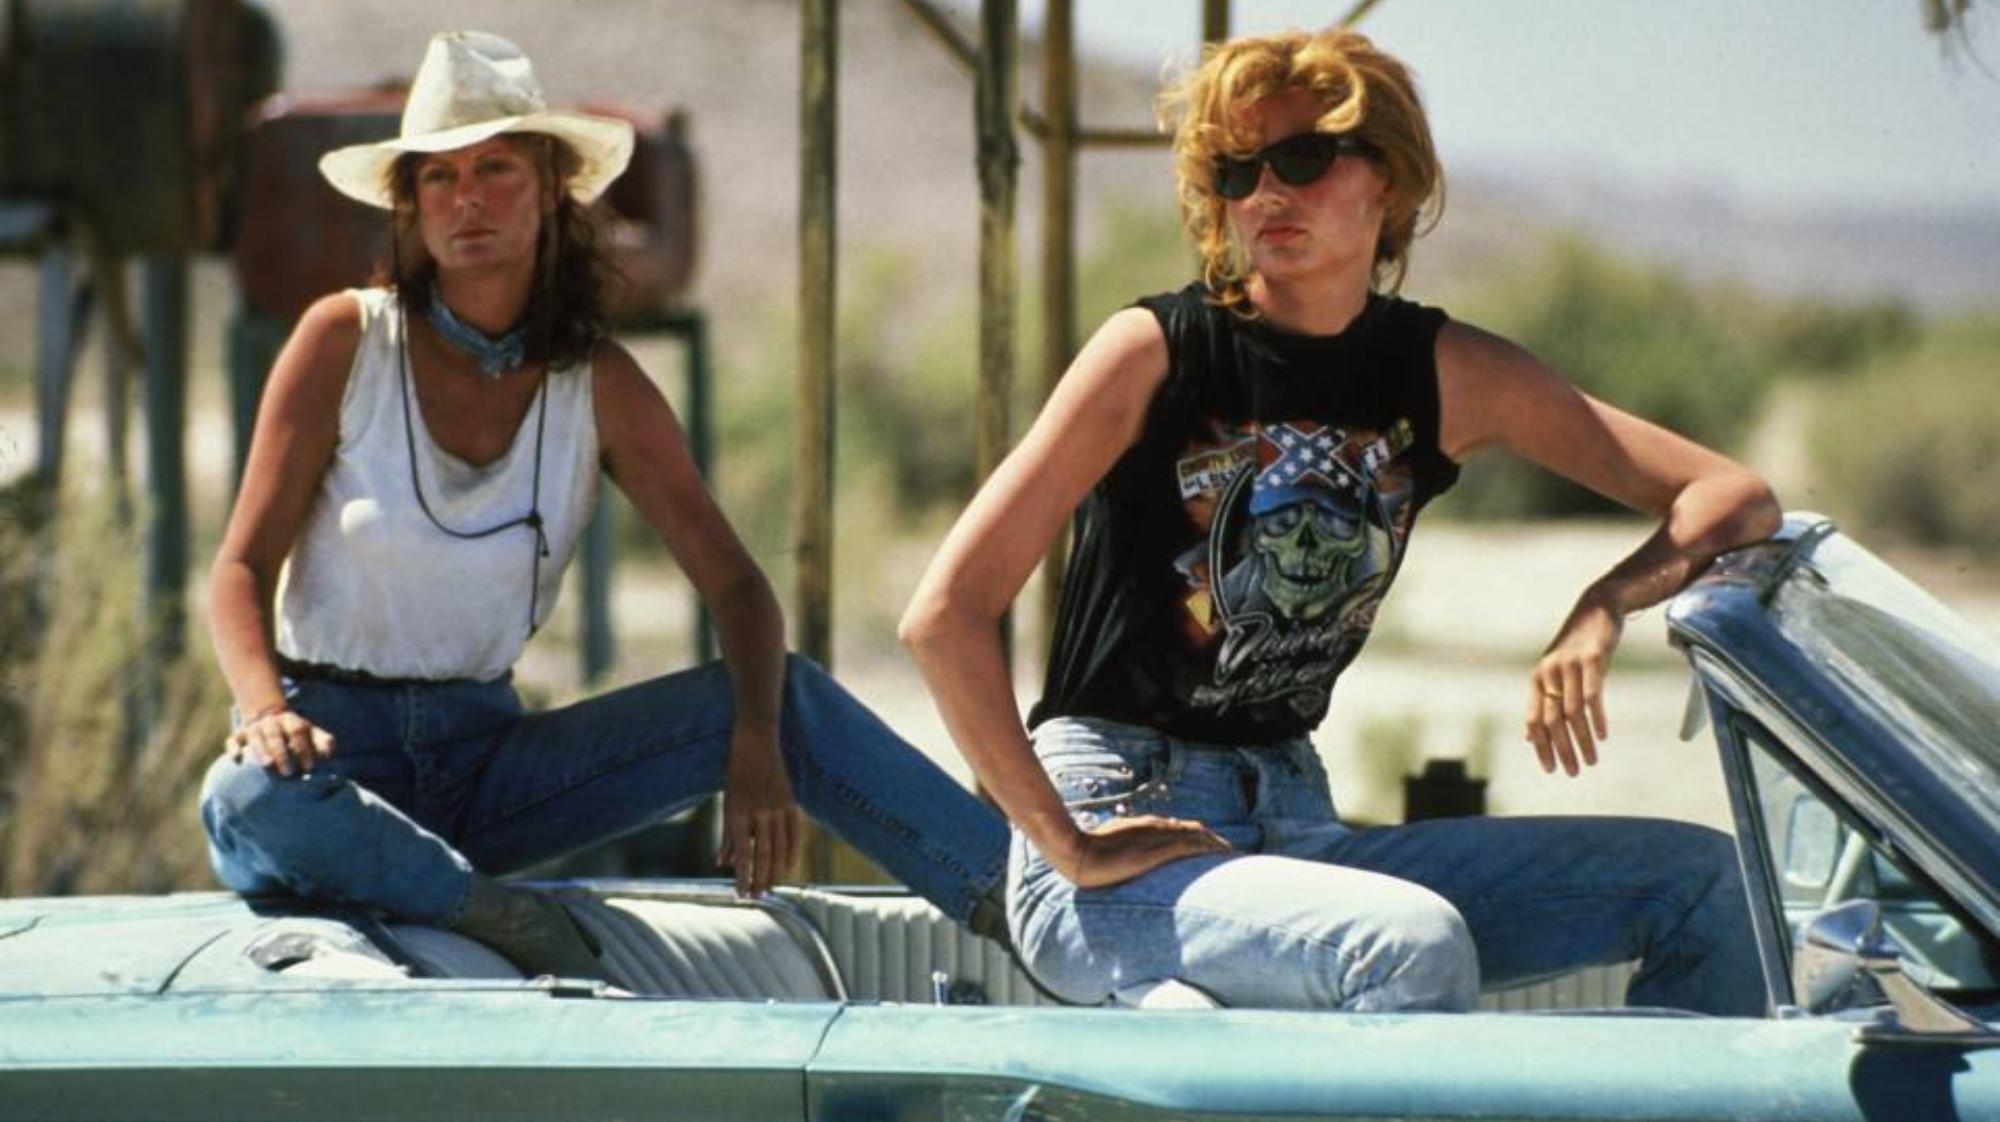 Geena Davis and Susan Sarandon, sitting on top of the seats in a blue convertible